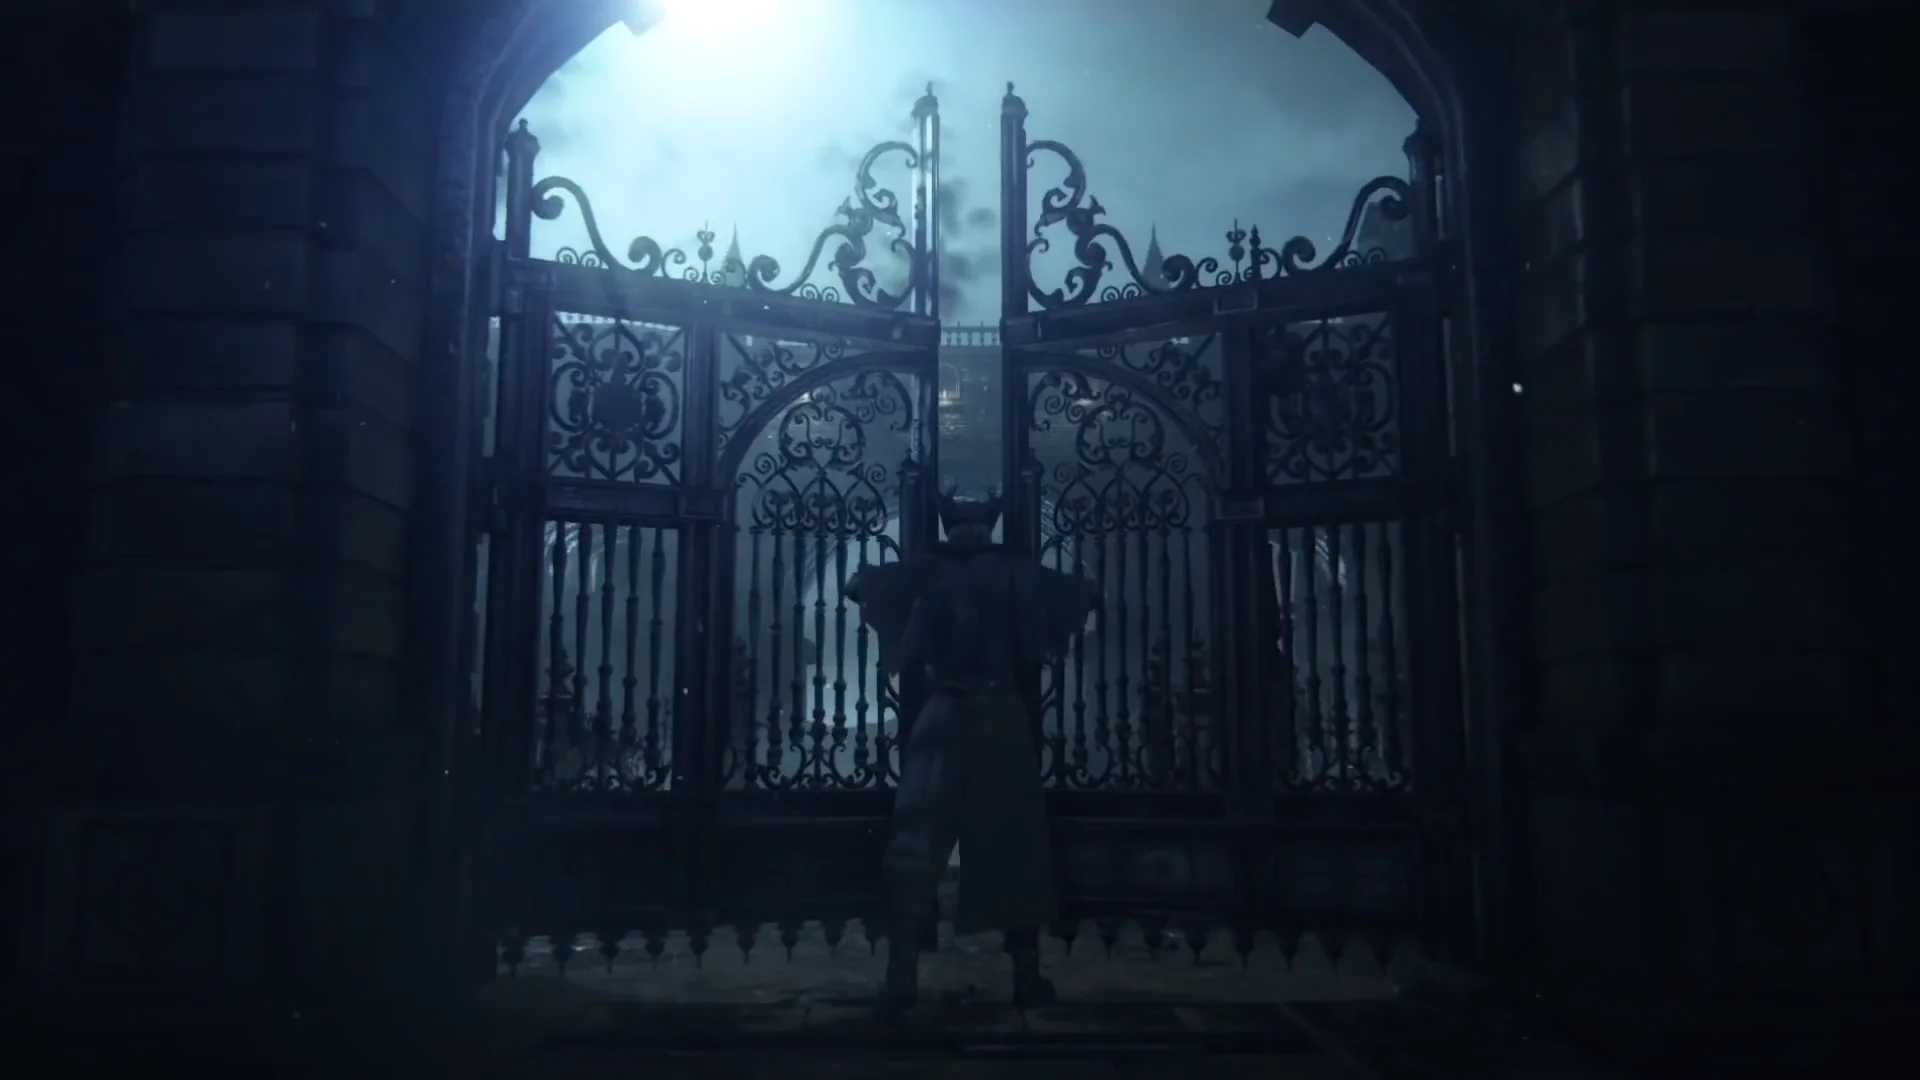 Bloodborne Remaster Coming to PS5 & PC on Vimeo